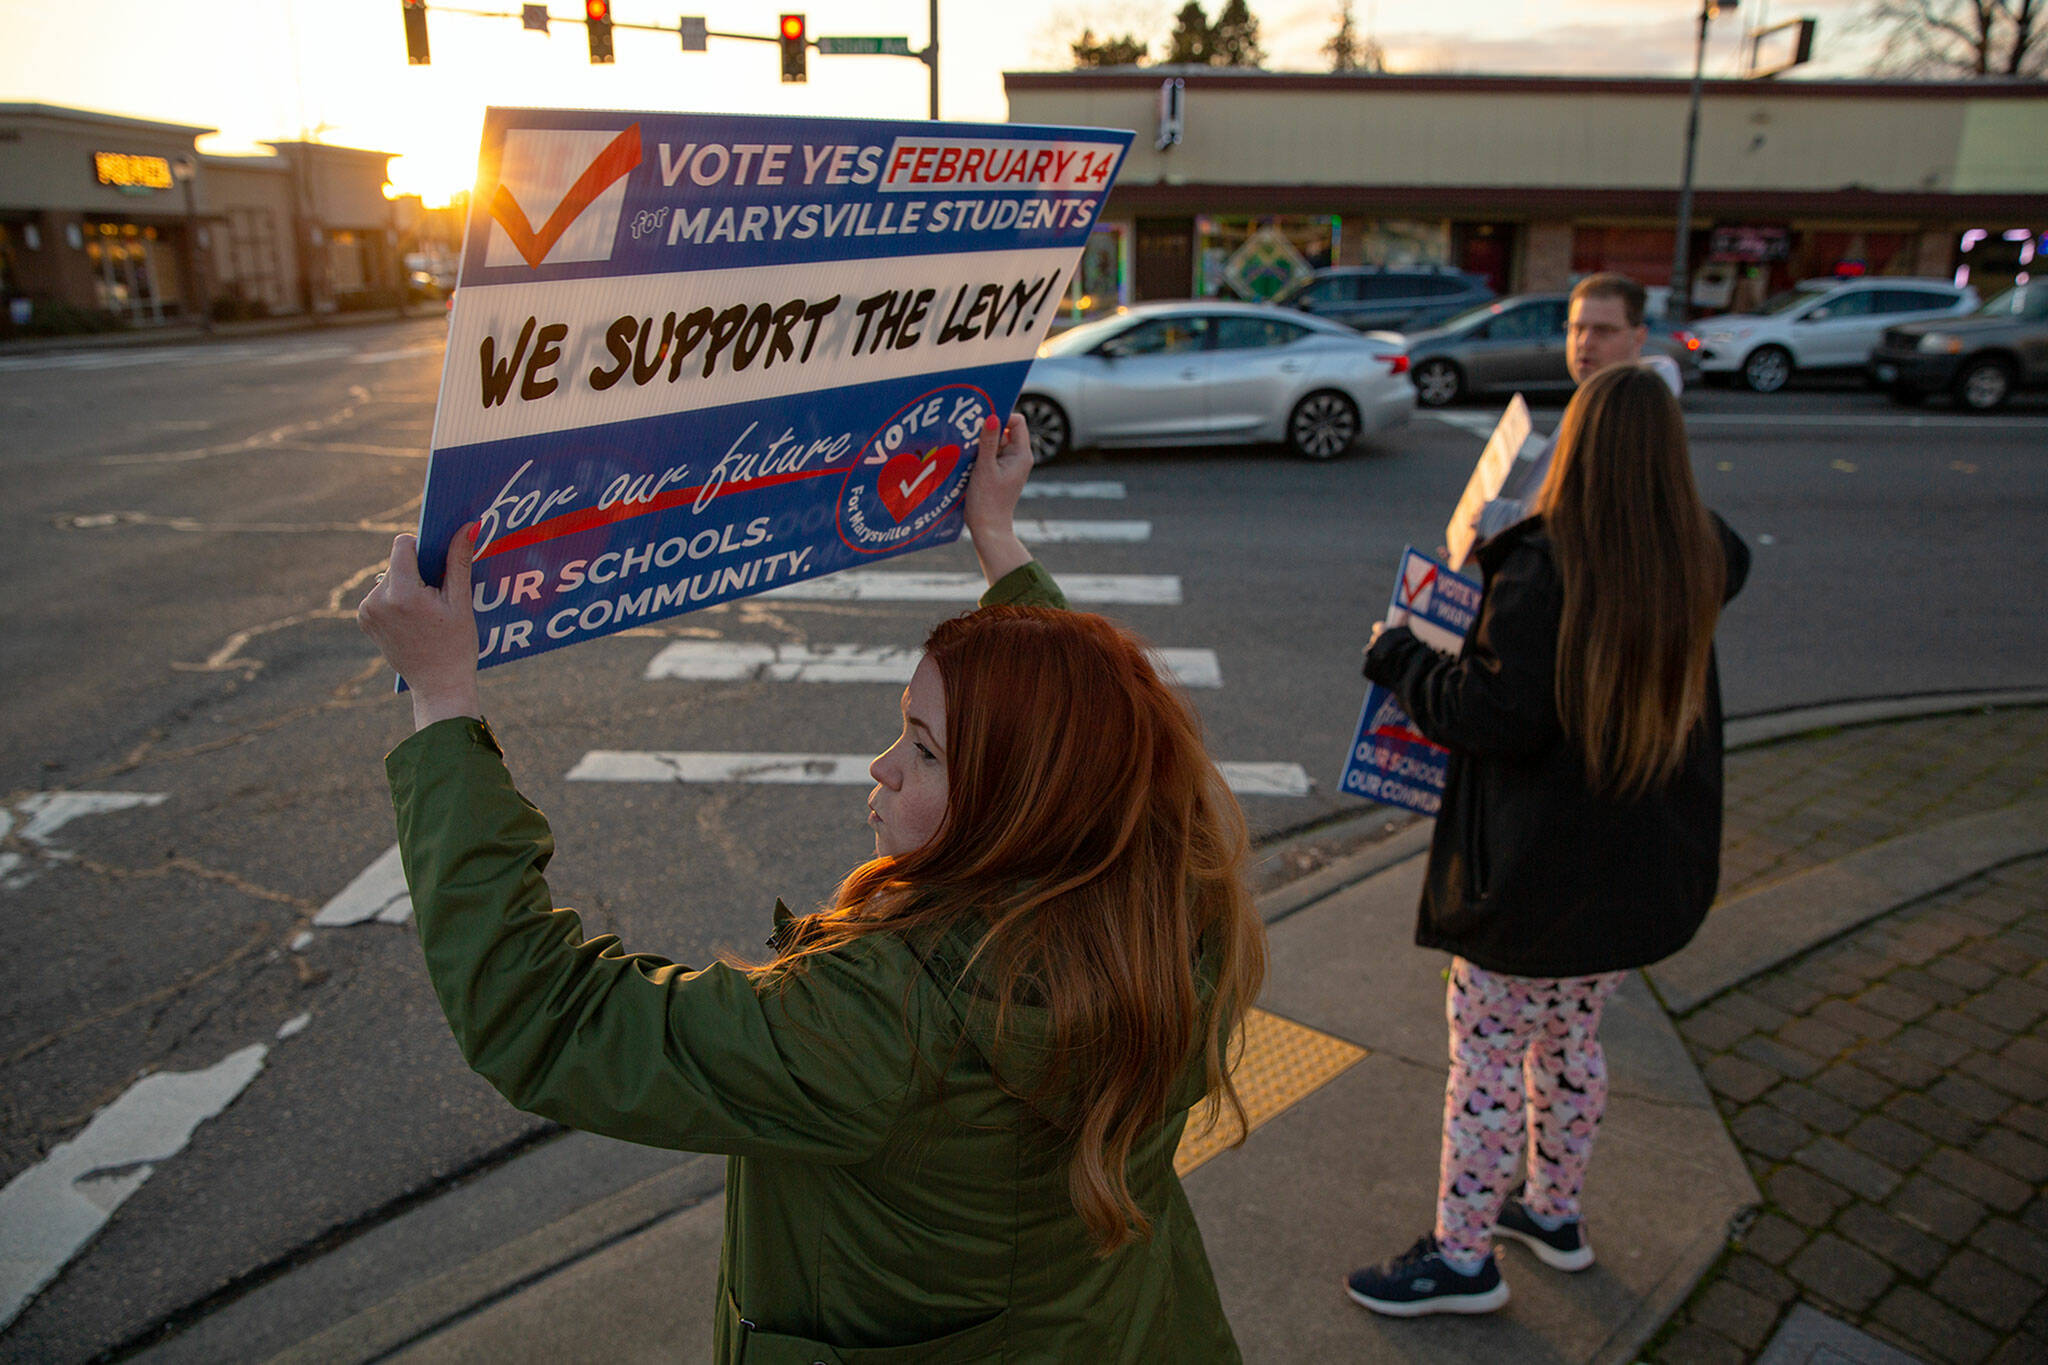 Community advocate and former state representative Emily Wicks waves signs at the corner of 4th and State along with Christie Ryba-Johnson and Matt Ruskowski, both Marysville School District employees, in support of a school levy being voted on Tuesday in Marysville. (Ryan Berry / The Herald)